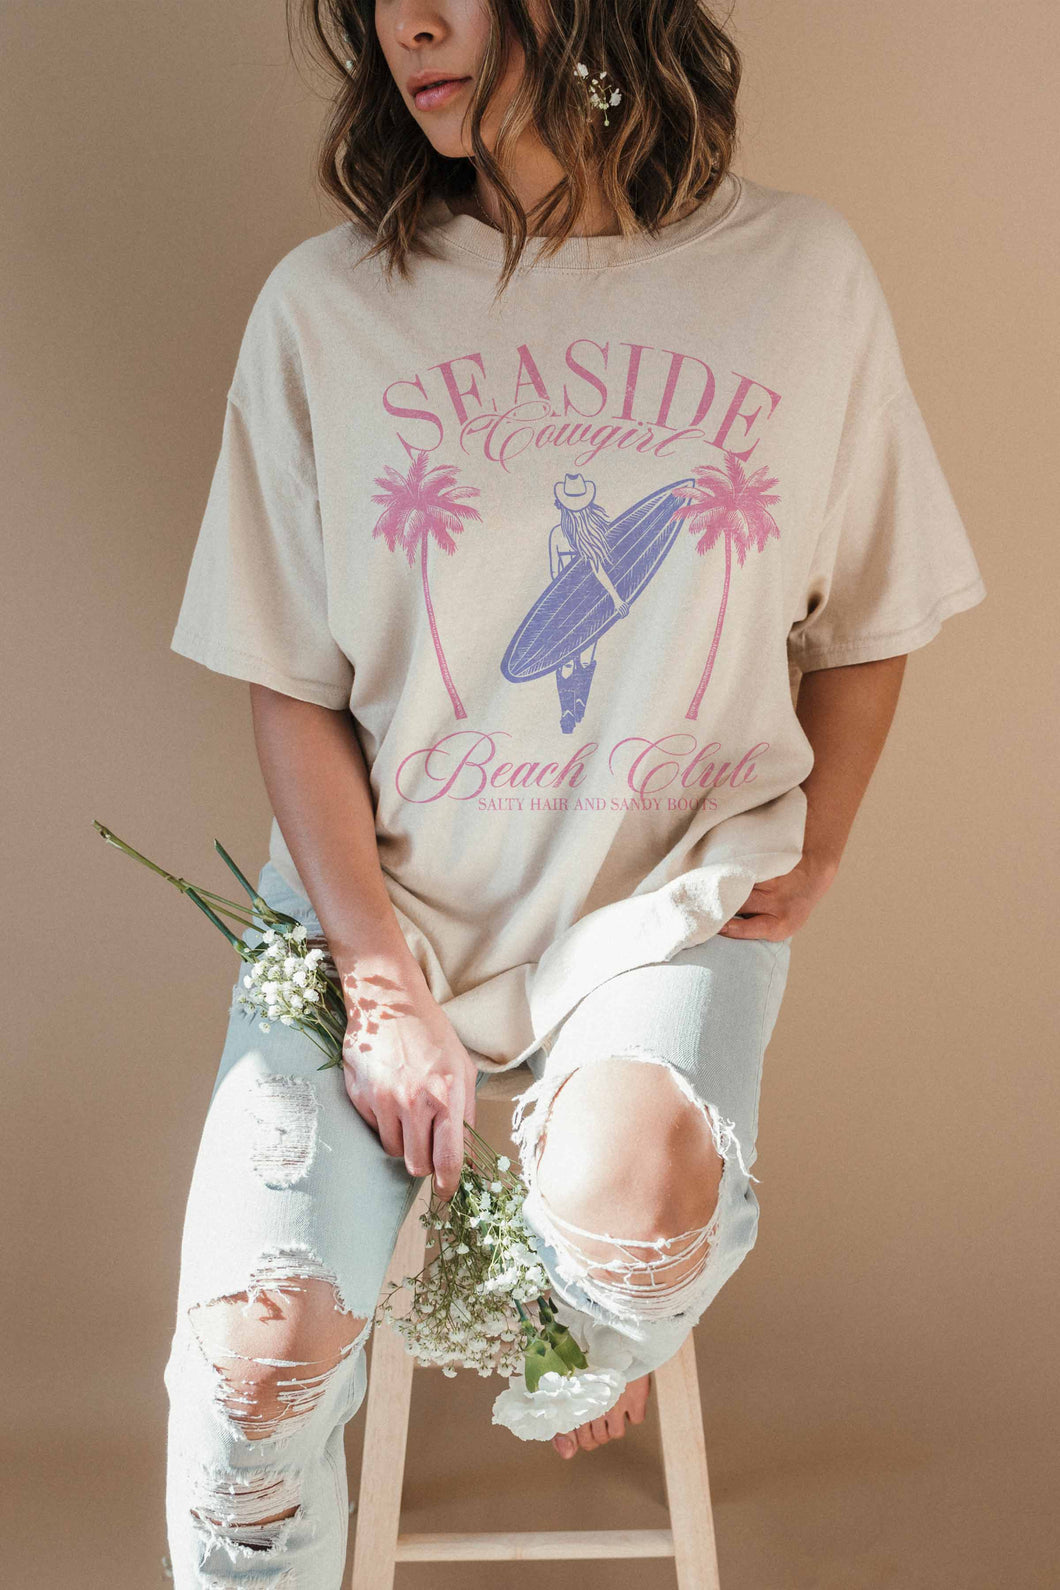 GOOD DAY STREET - [G1473X-OTS]-SEASIDE COWGIRL BEACH OVERSIZED GRAPHIC TEE: S/M / IVORY